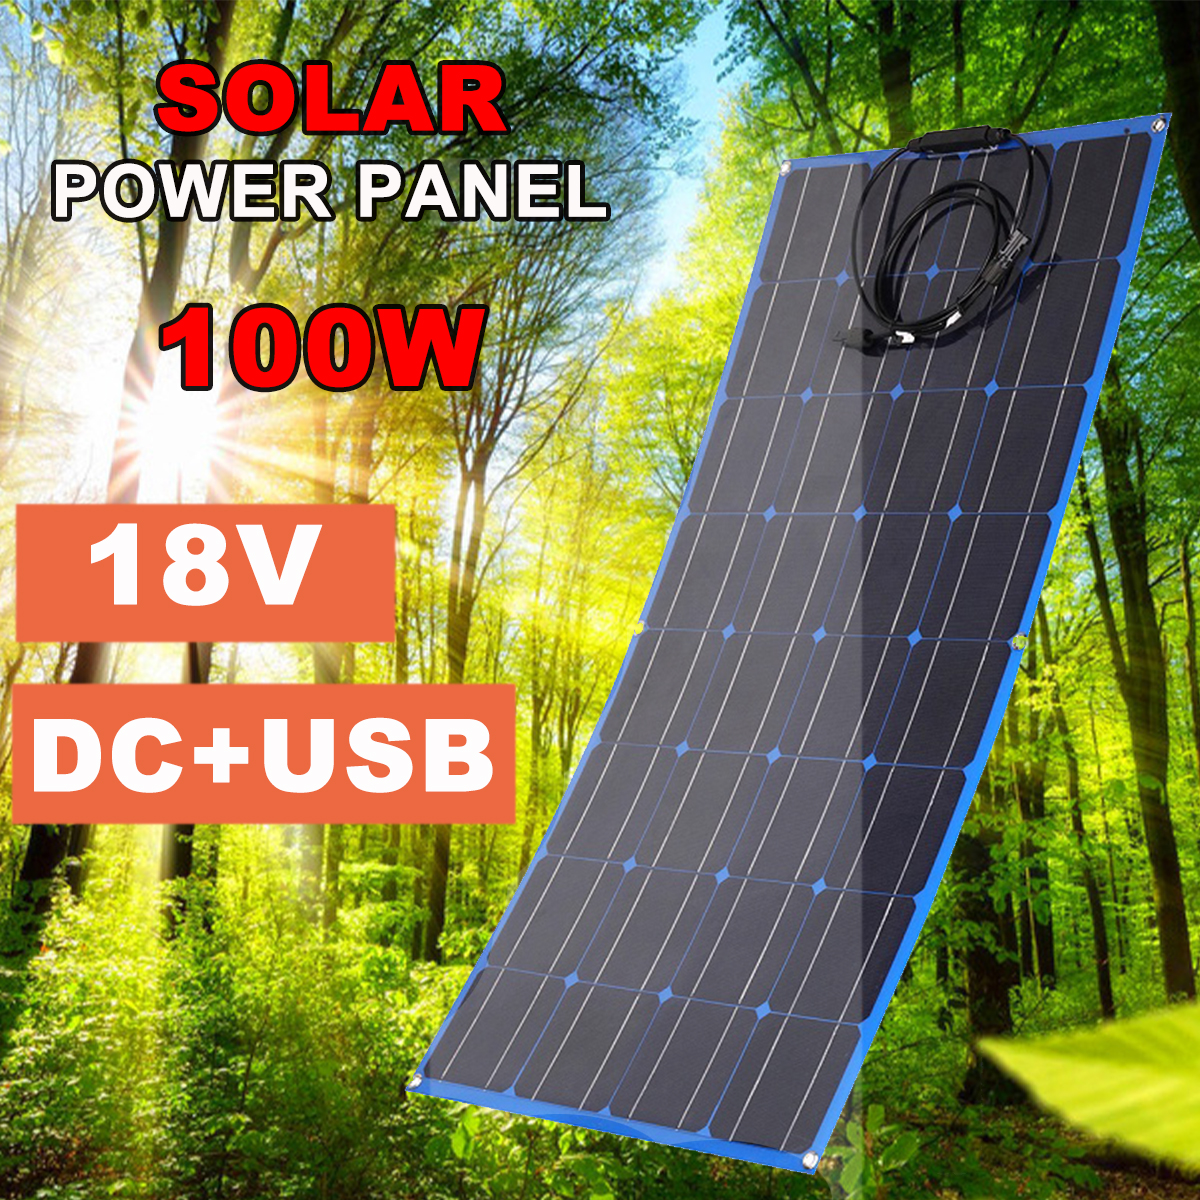 100W-18V-Solar-Panel-Monocrystalline-Semi-flexible-Battery-Charger-Outdoor-Camping-Travel-1856150-1